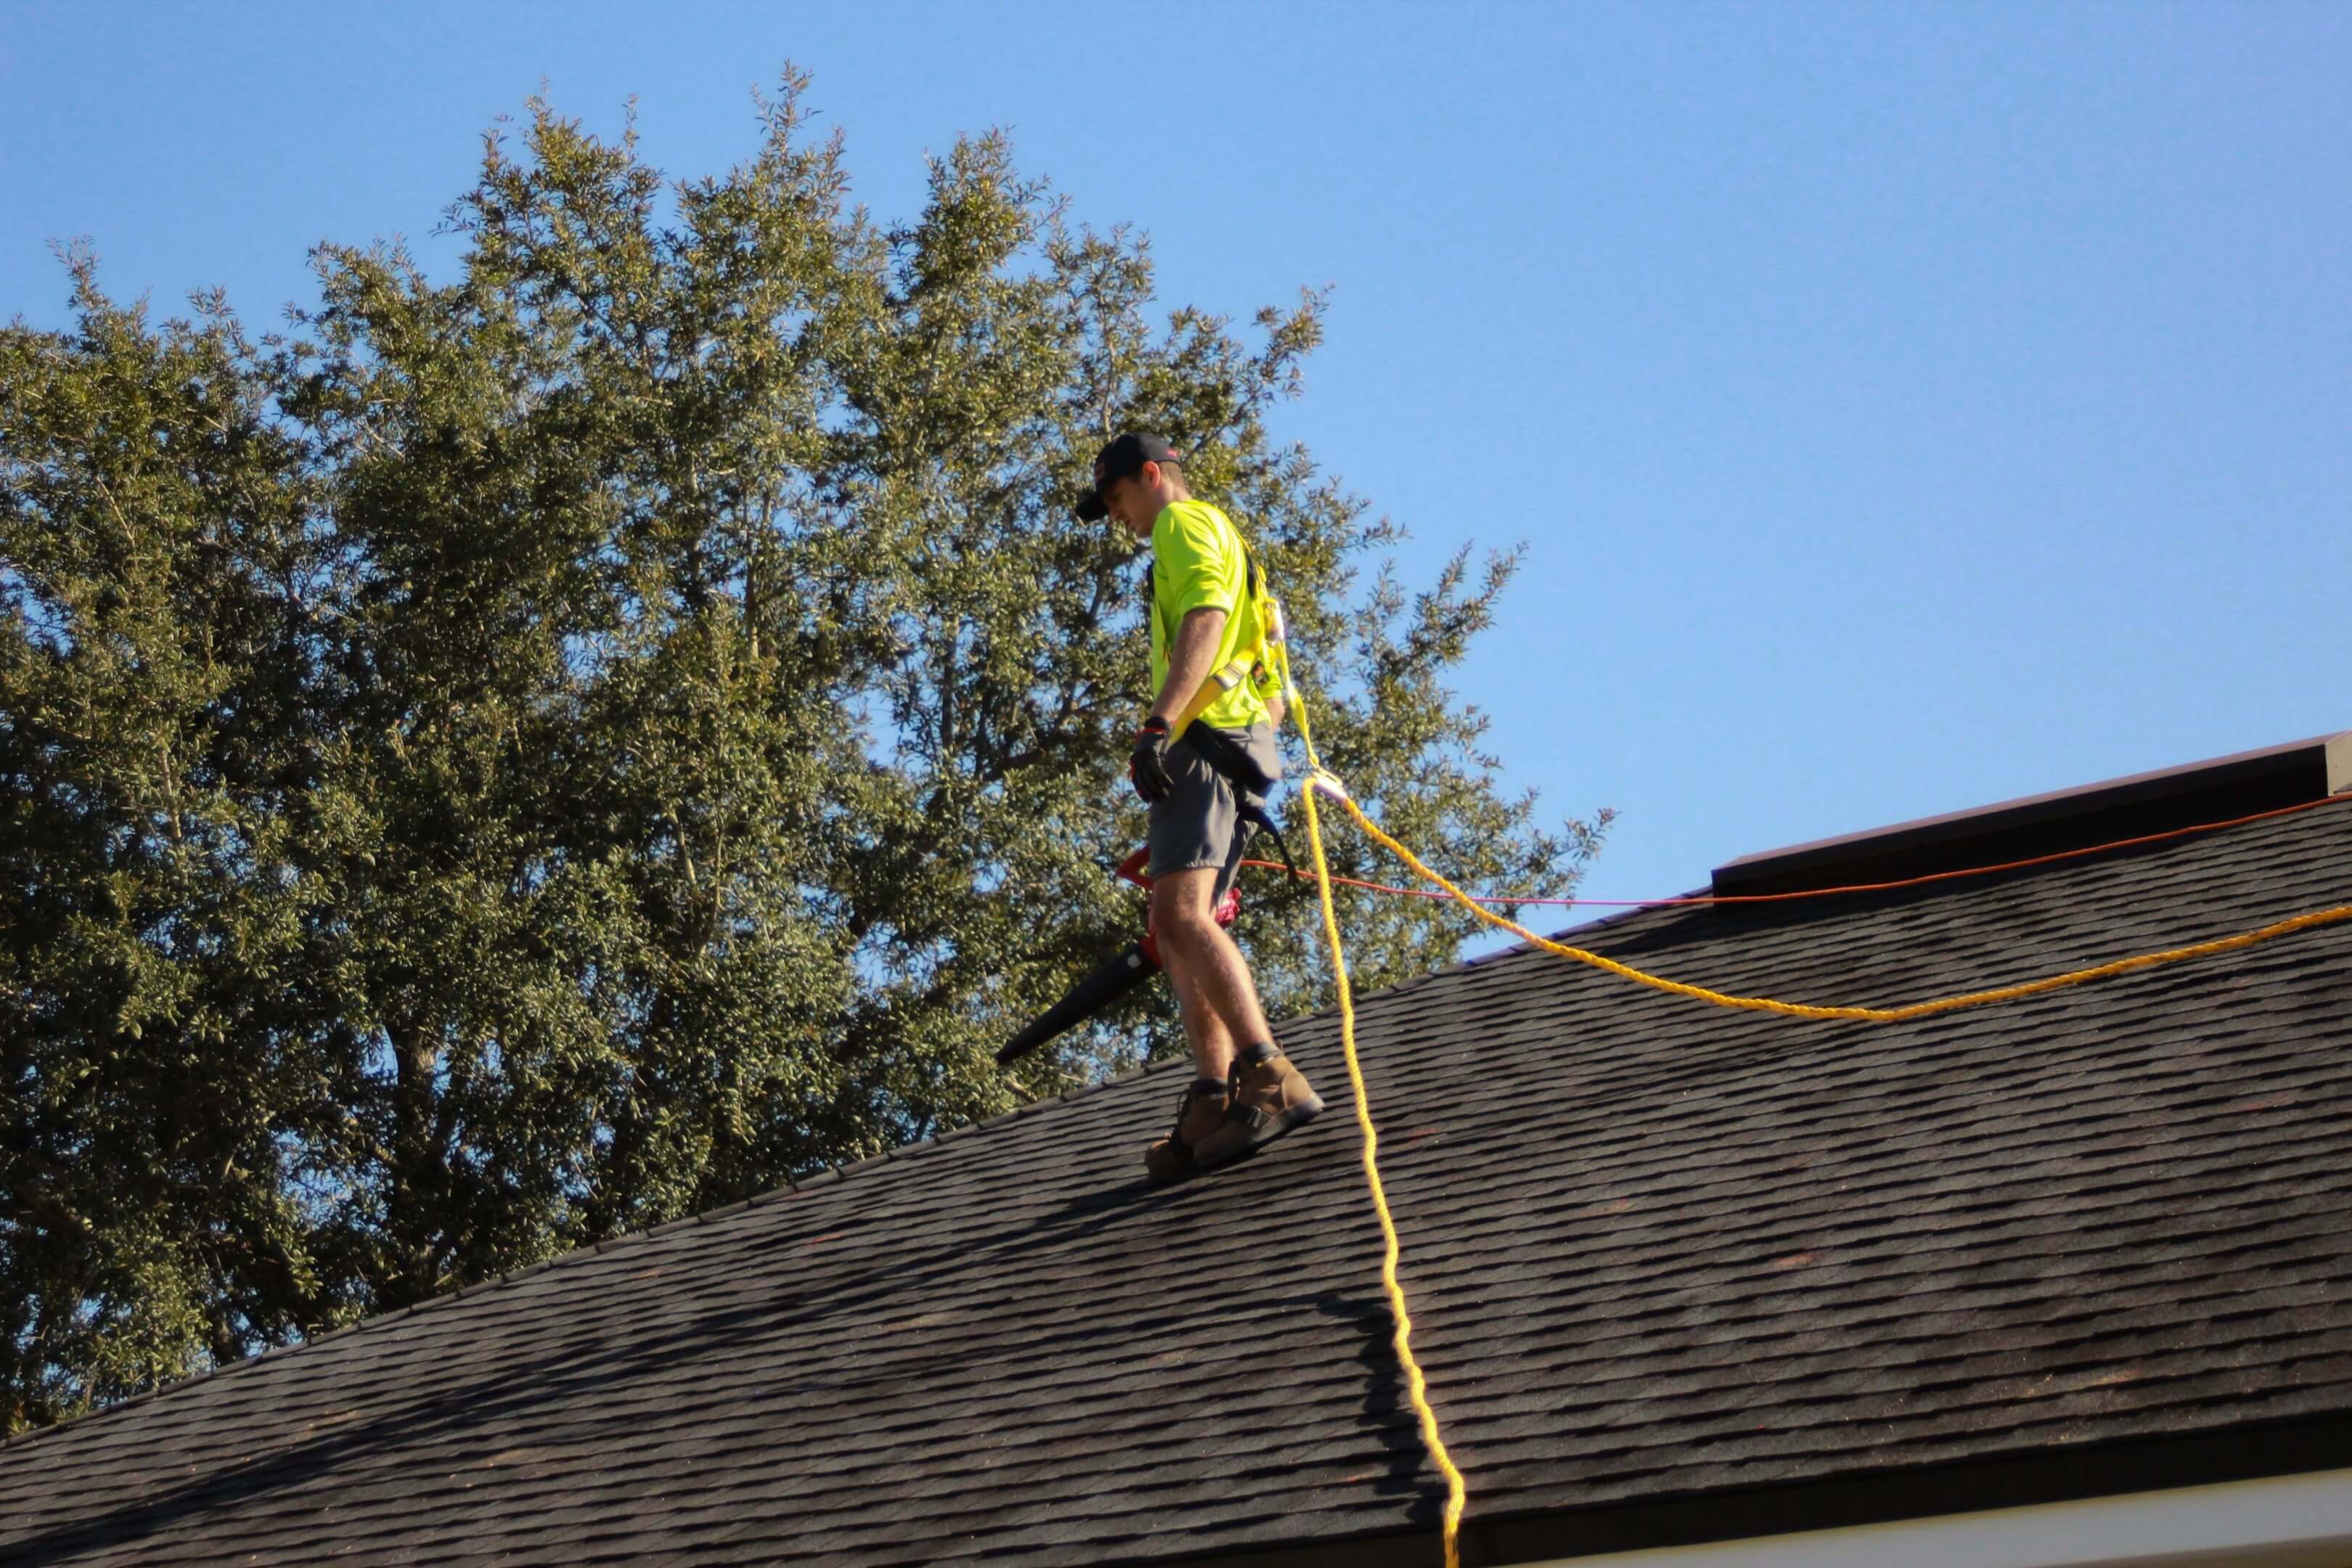 a roofer surveying the jobsite